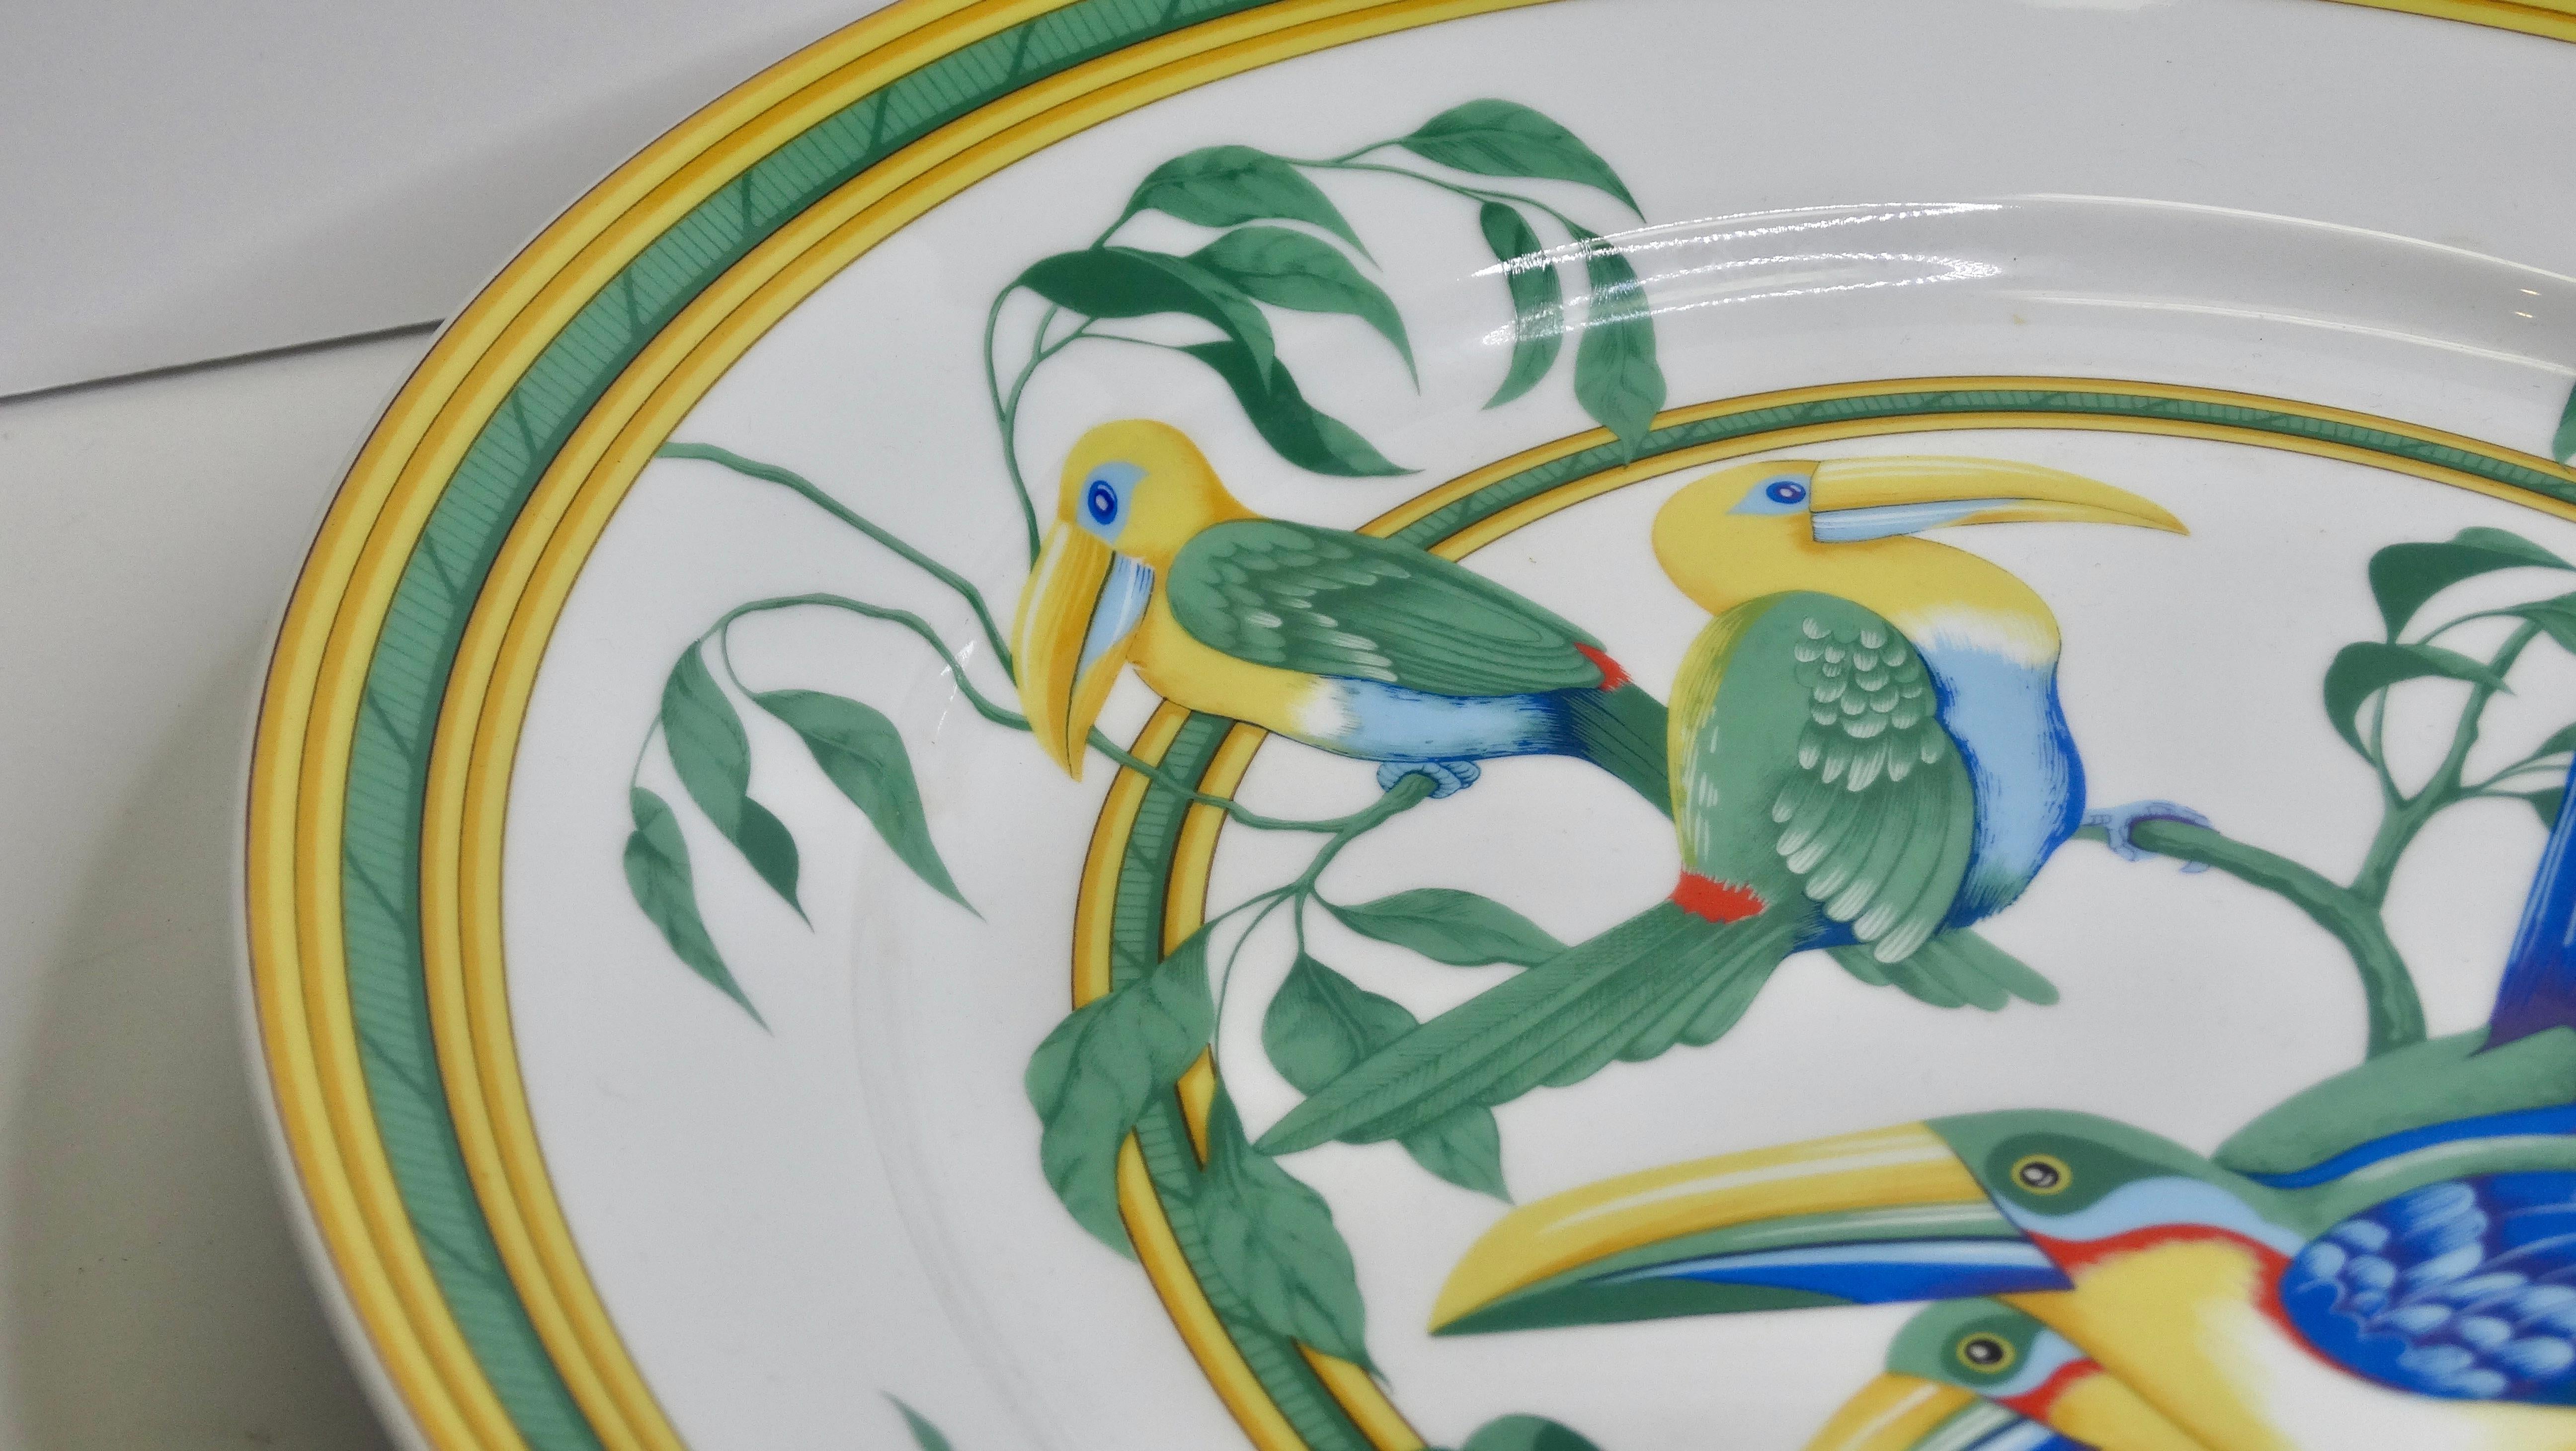 Hermes Porcelain Toucan Plate In Excellent Condition For Sale In Scottsdale, AZ